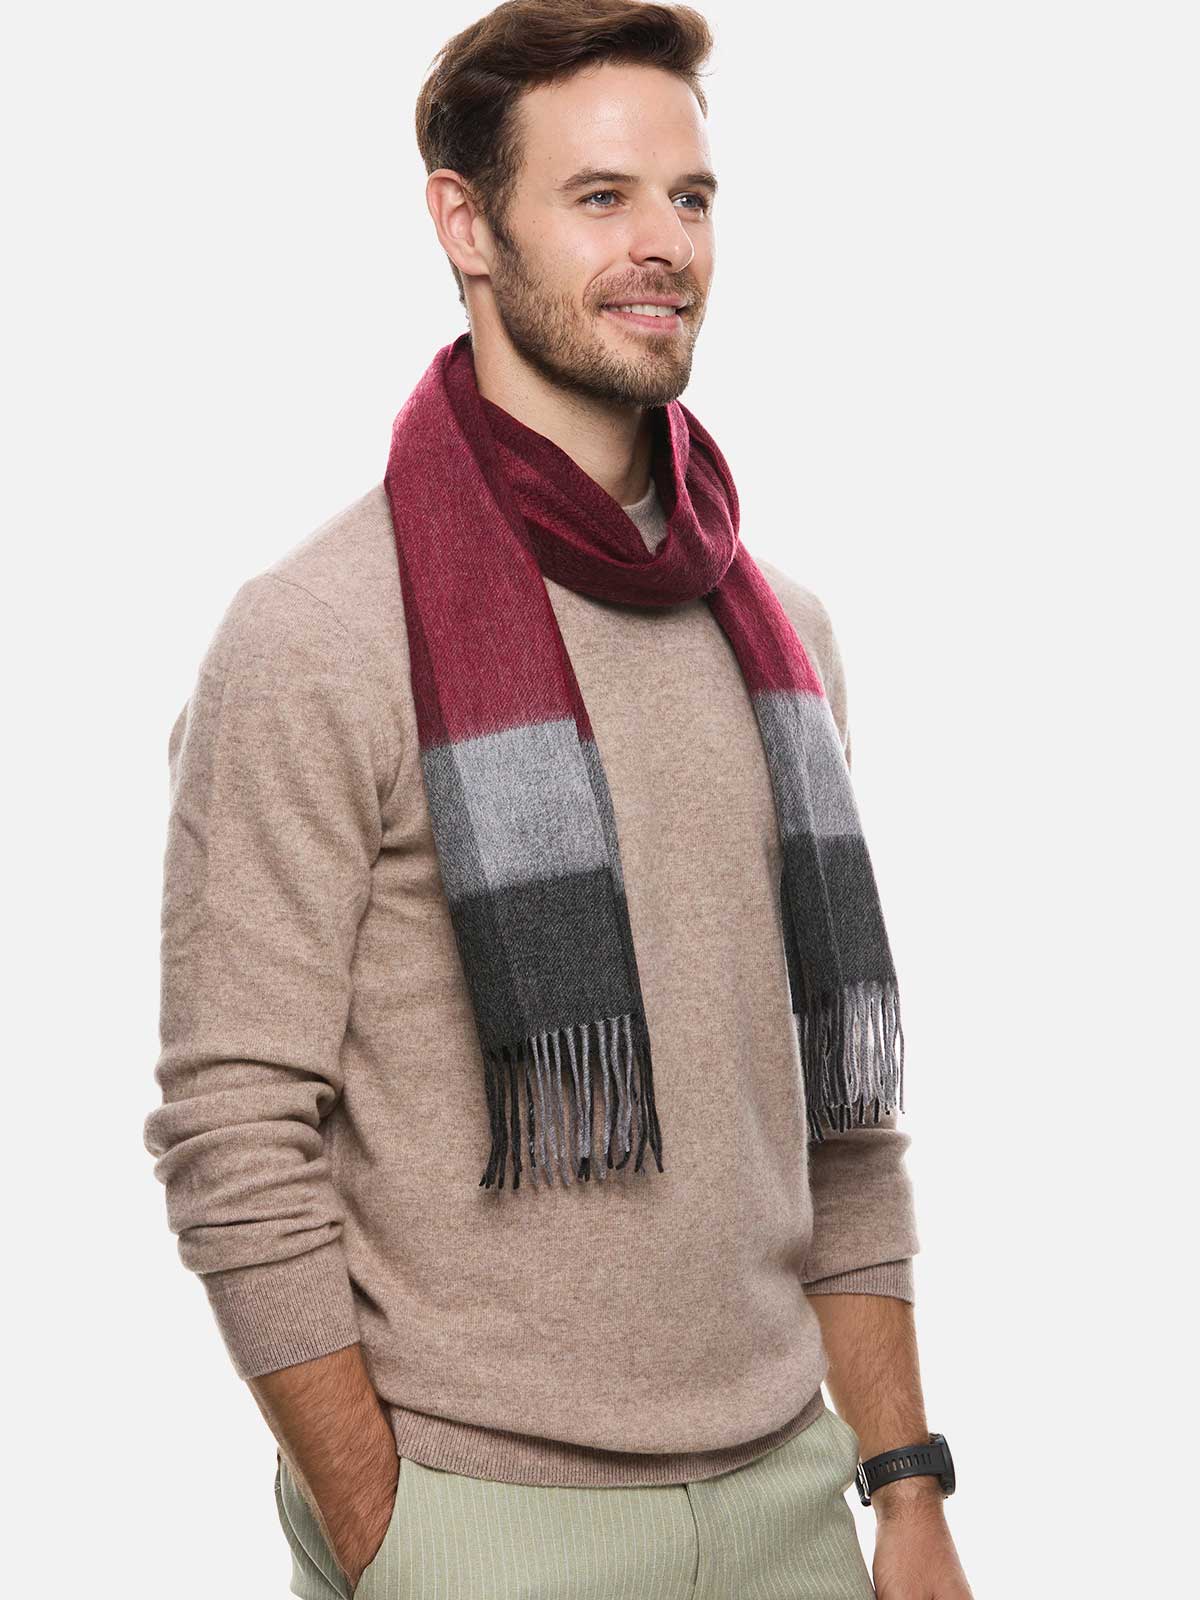 Woven Cashmere Scarf in Oatmeal